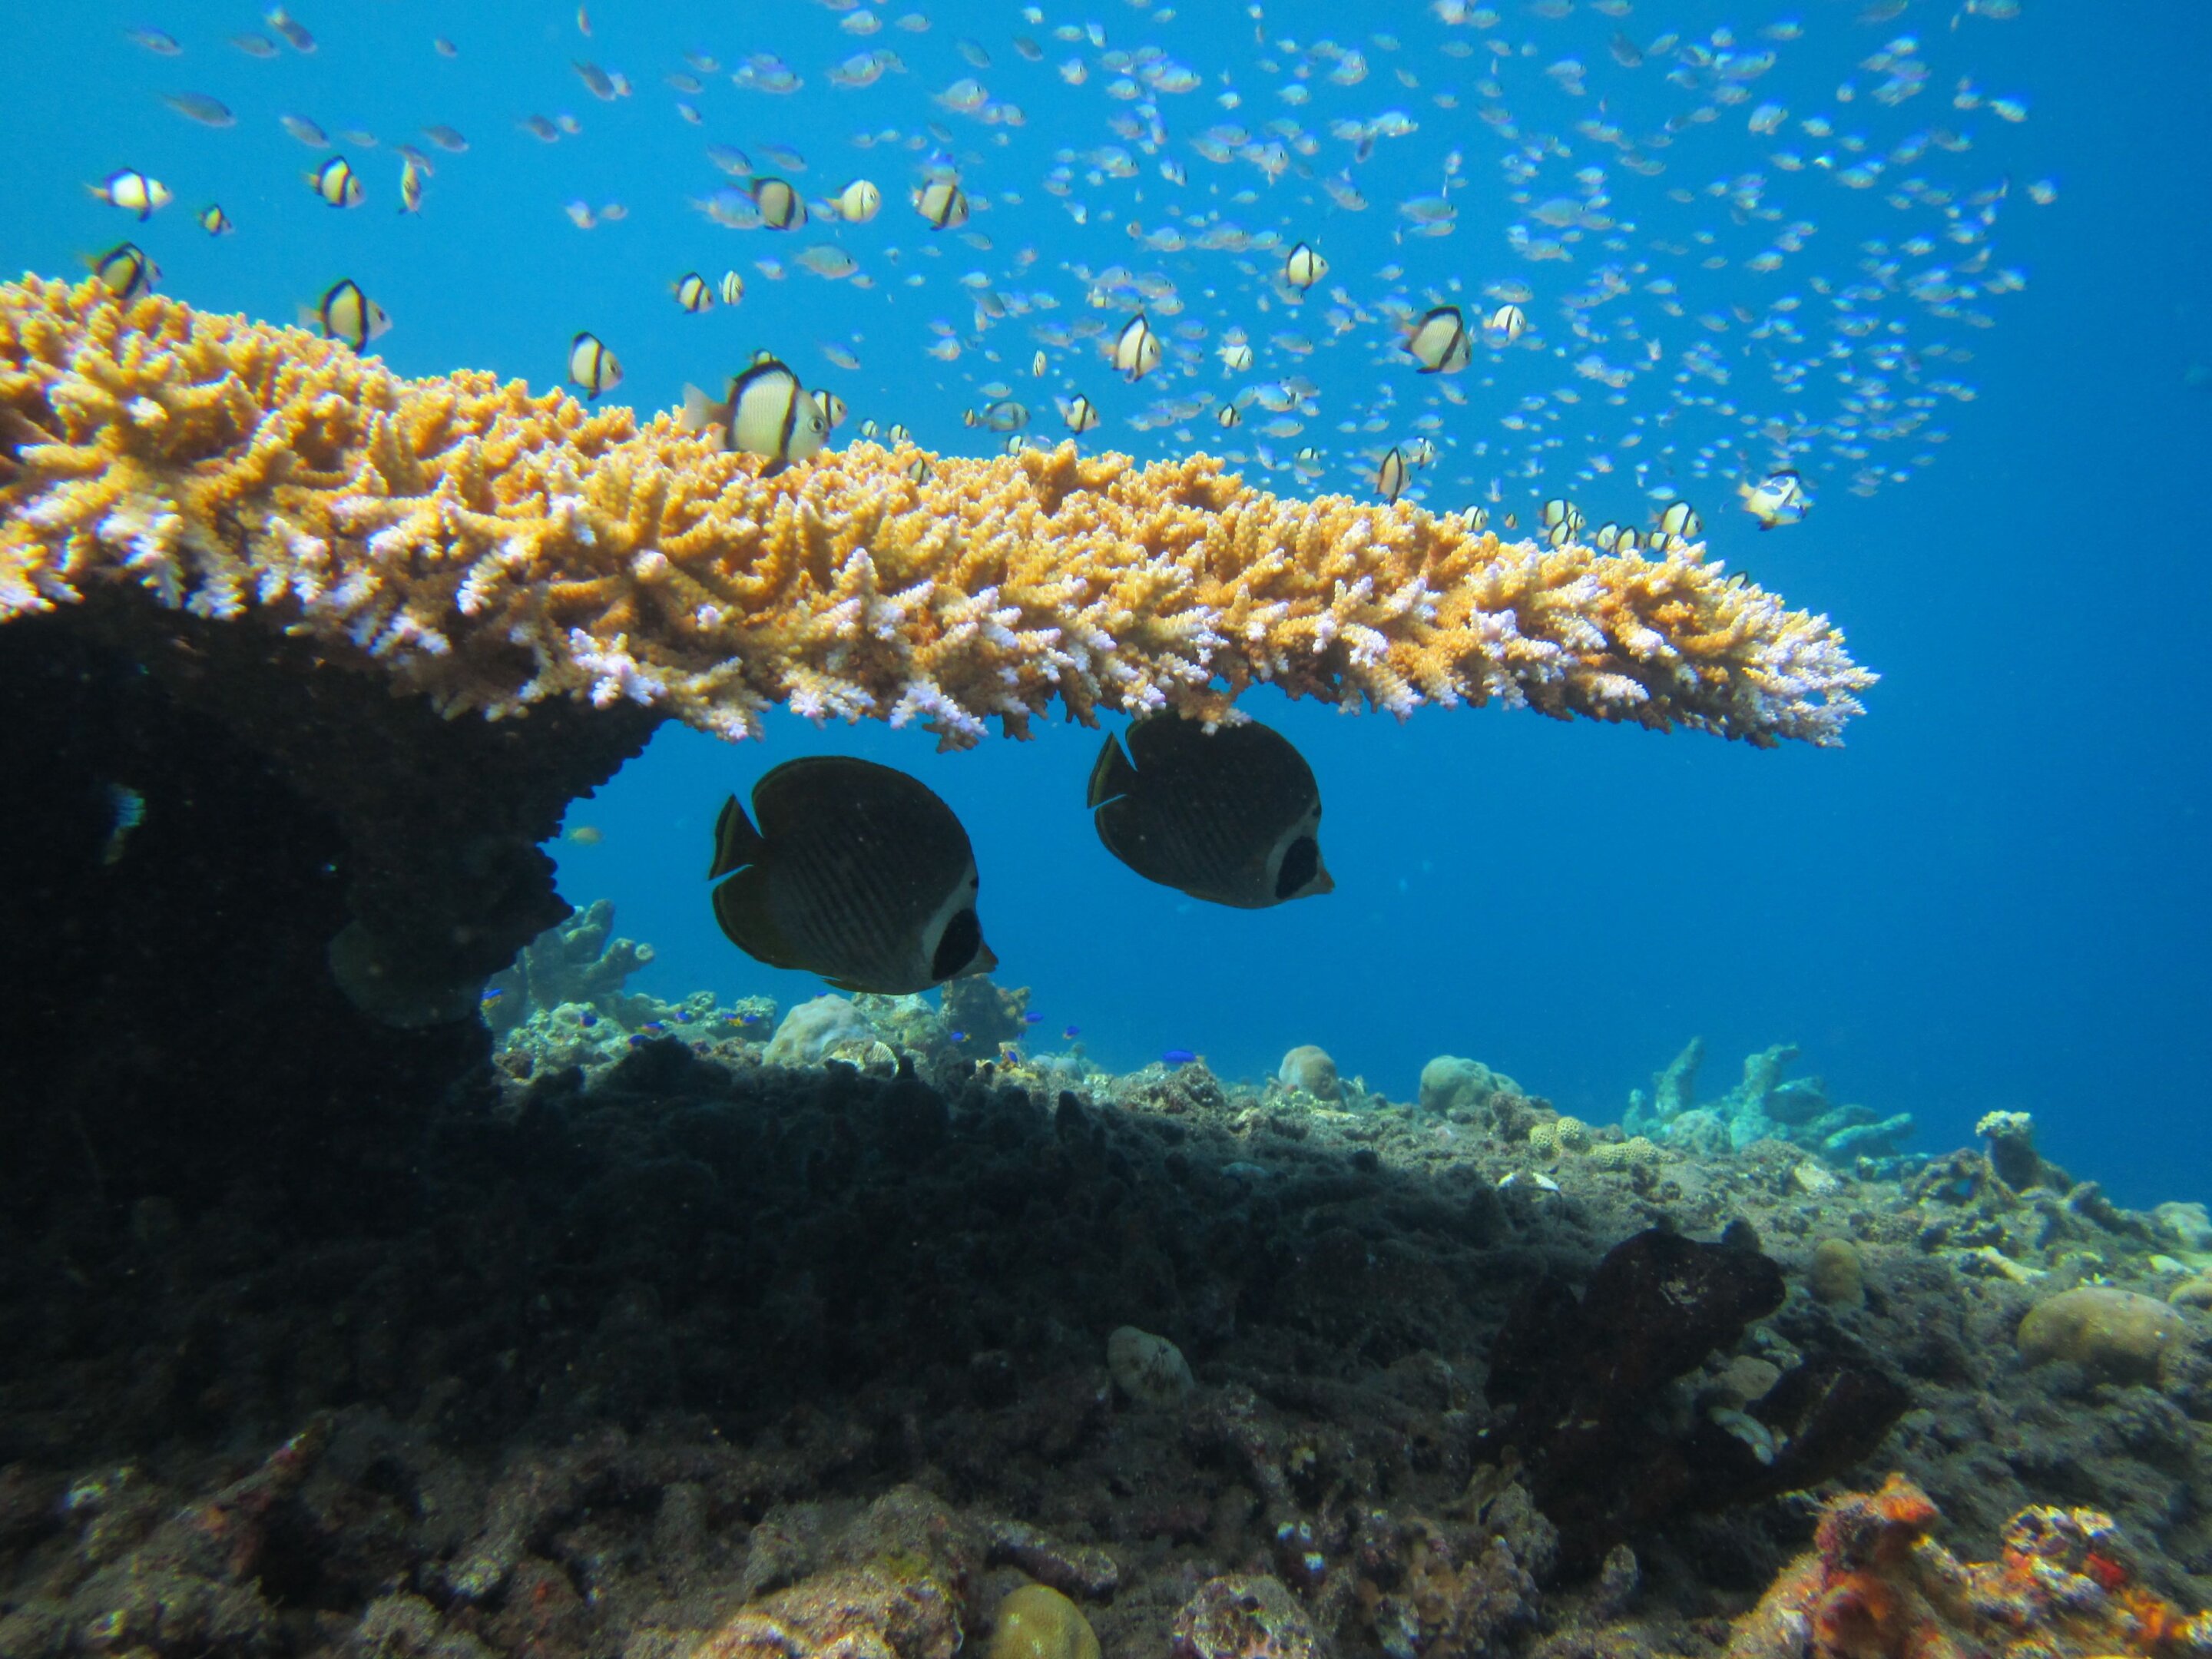 #Reef fish must relearn the ‘rules of engagement’ after coral bleaching